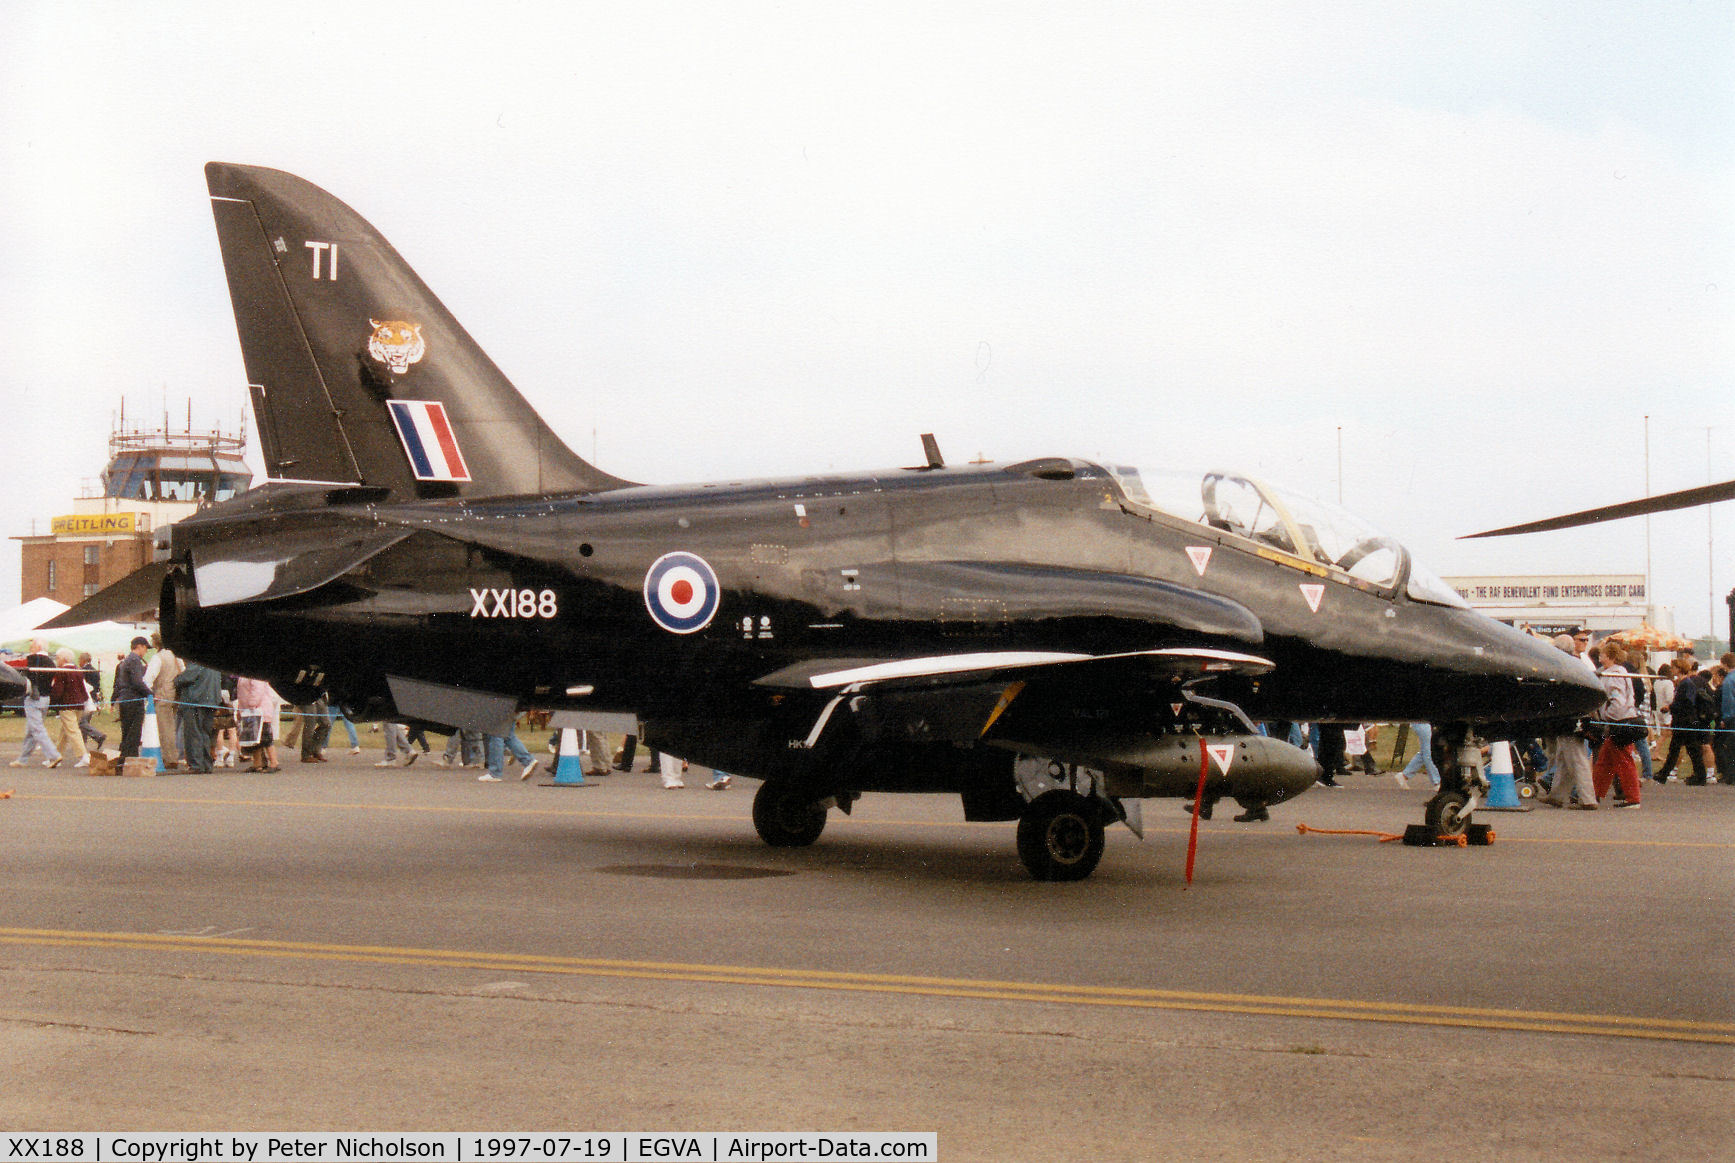 XX188, 1977 Hawker Siddeley Hawk T.1A C/N 035/312035, Hawk T.1A, callsign Tiger 1, of 74[Reserve] Squadron at RAF Valley on display in the static park at the 1997 Intnl Air Tattoo at RAF Fairford.